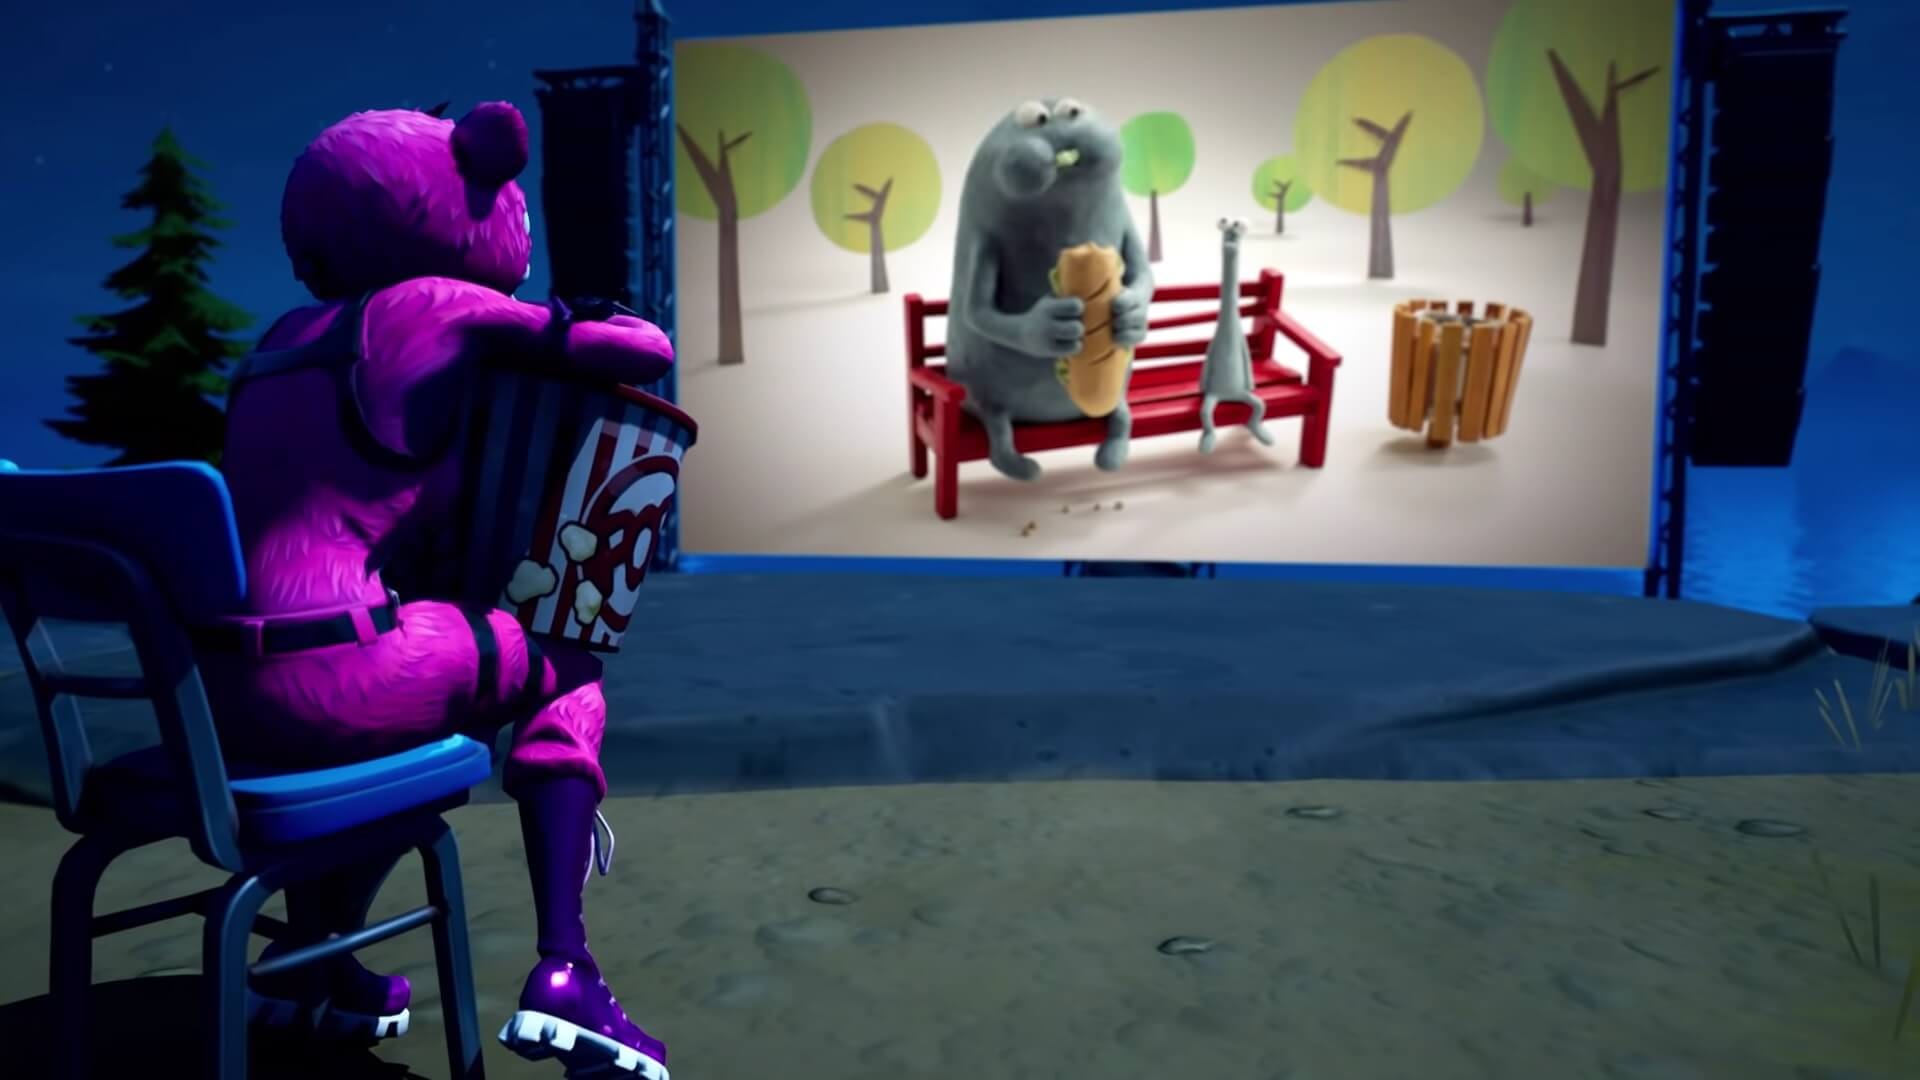 A Fortnite character watching Bench, one of the shorts airing at the Short Nite Film Festival.